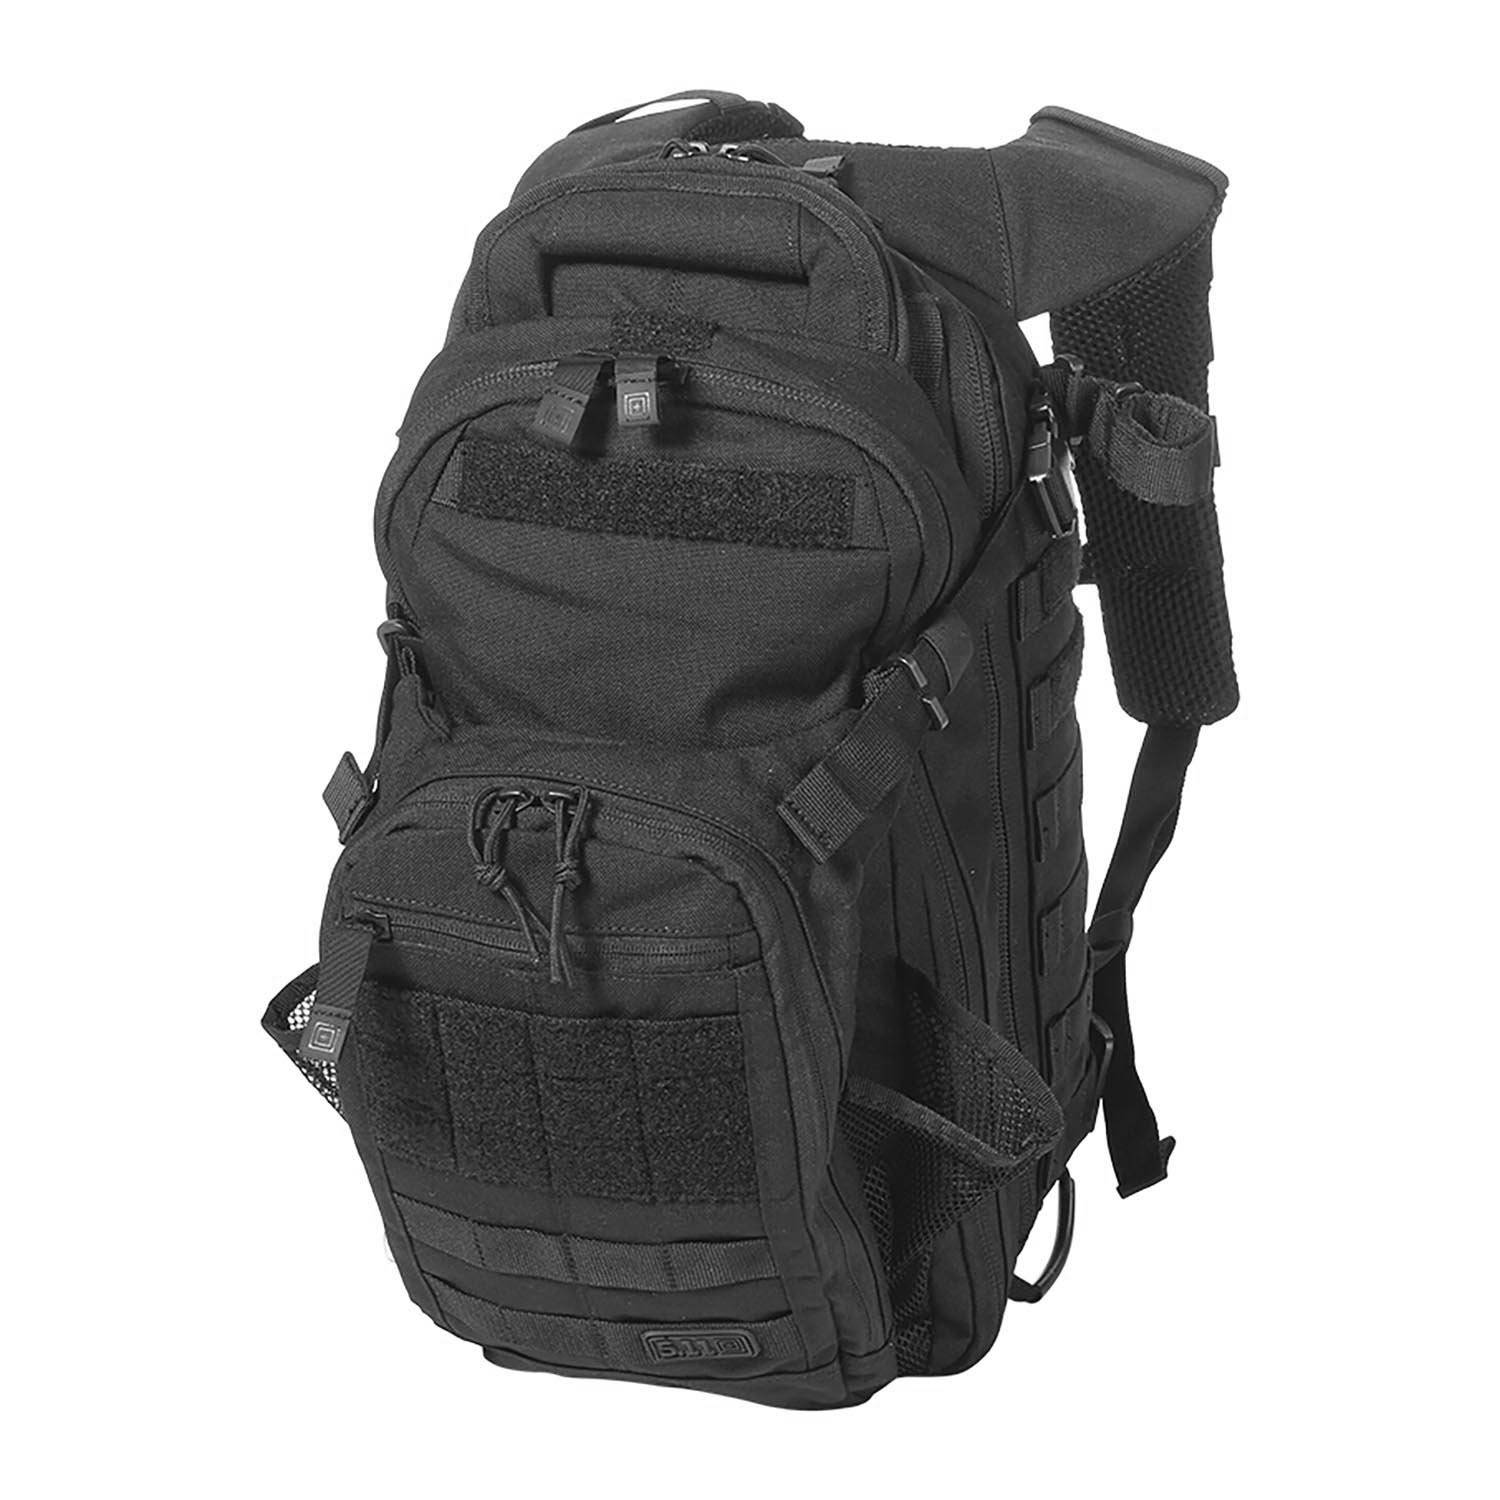 5.11 TACTICAL ALL HAZARDS NITRO BACKPACK 21L